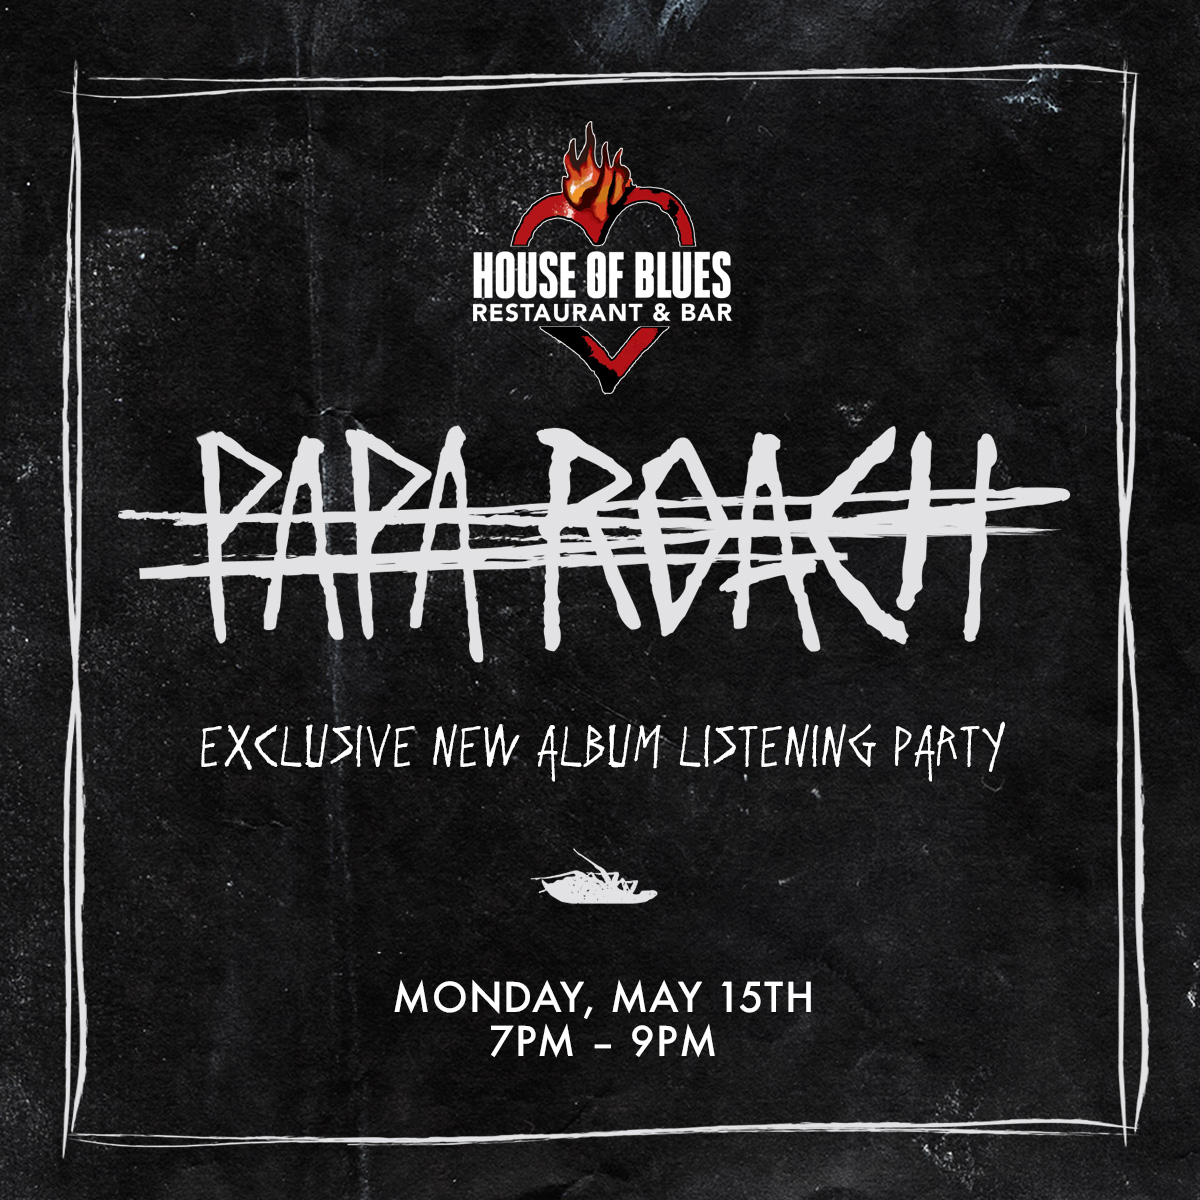 CONGRATS TO THE WINNERS OF THE PAPA ROACH LISTENING PARTY CONTEST!